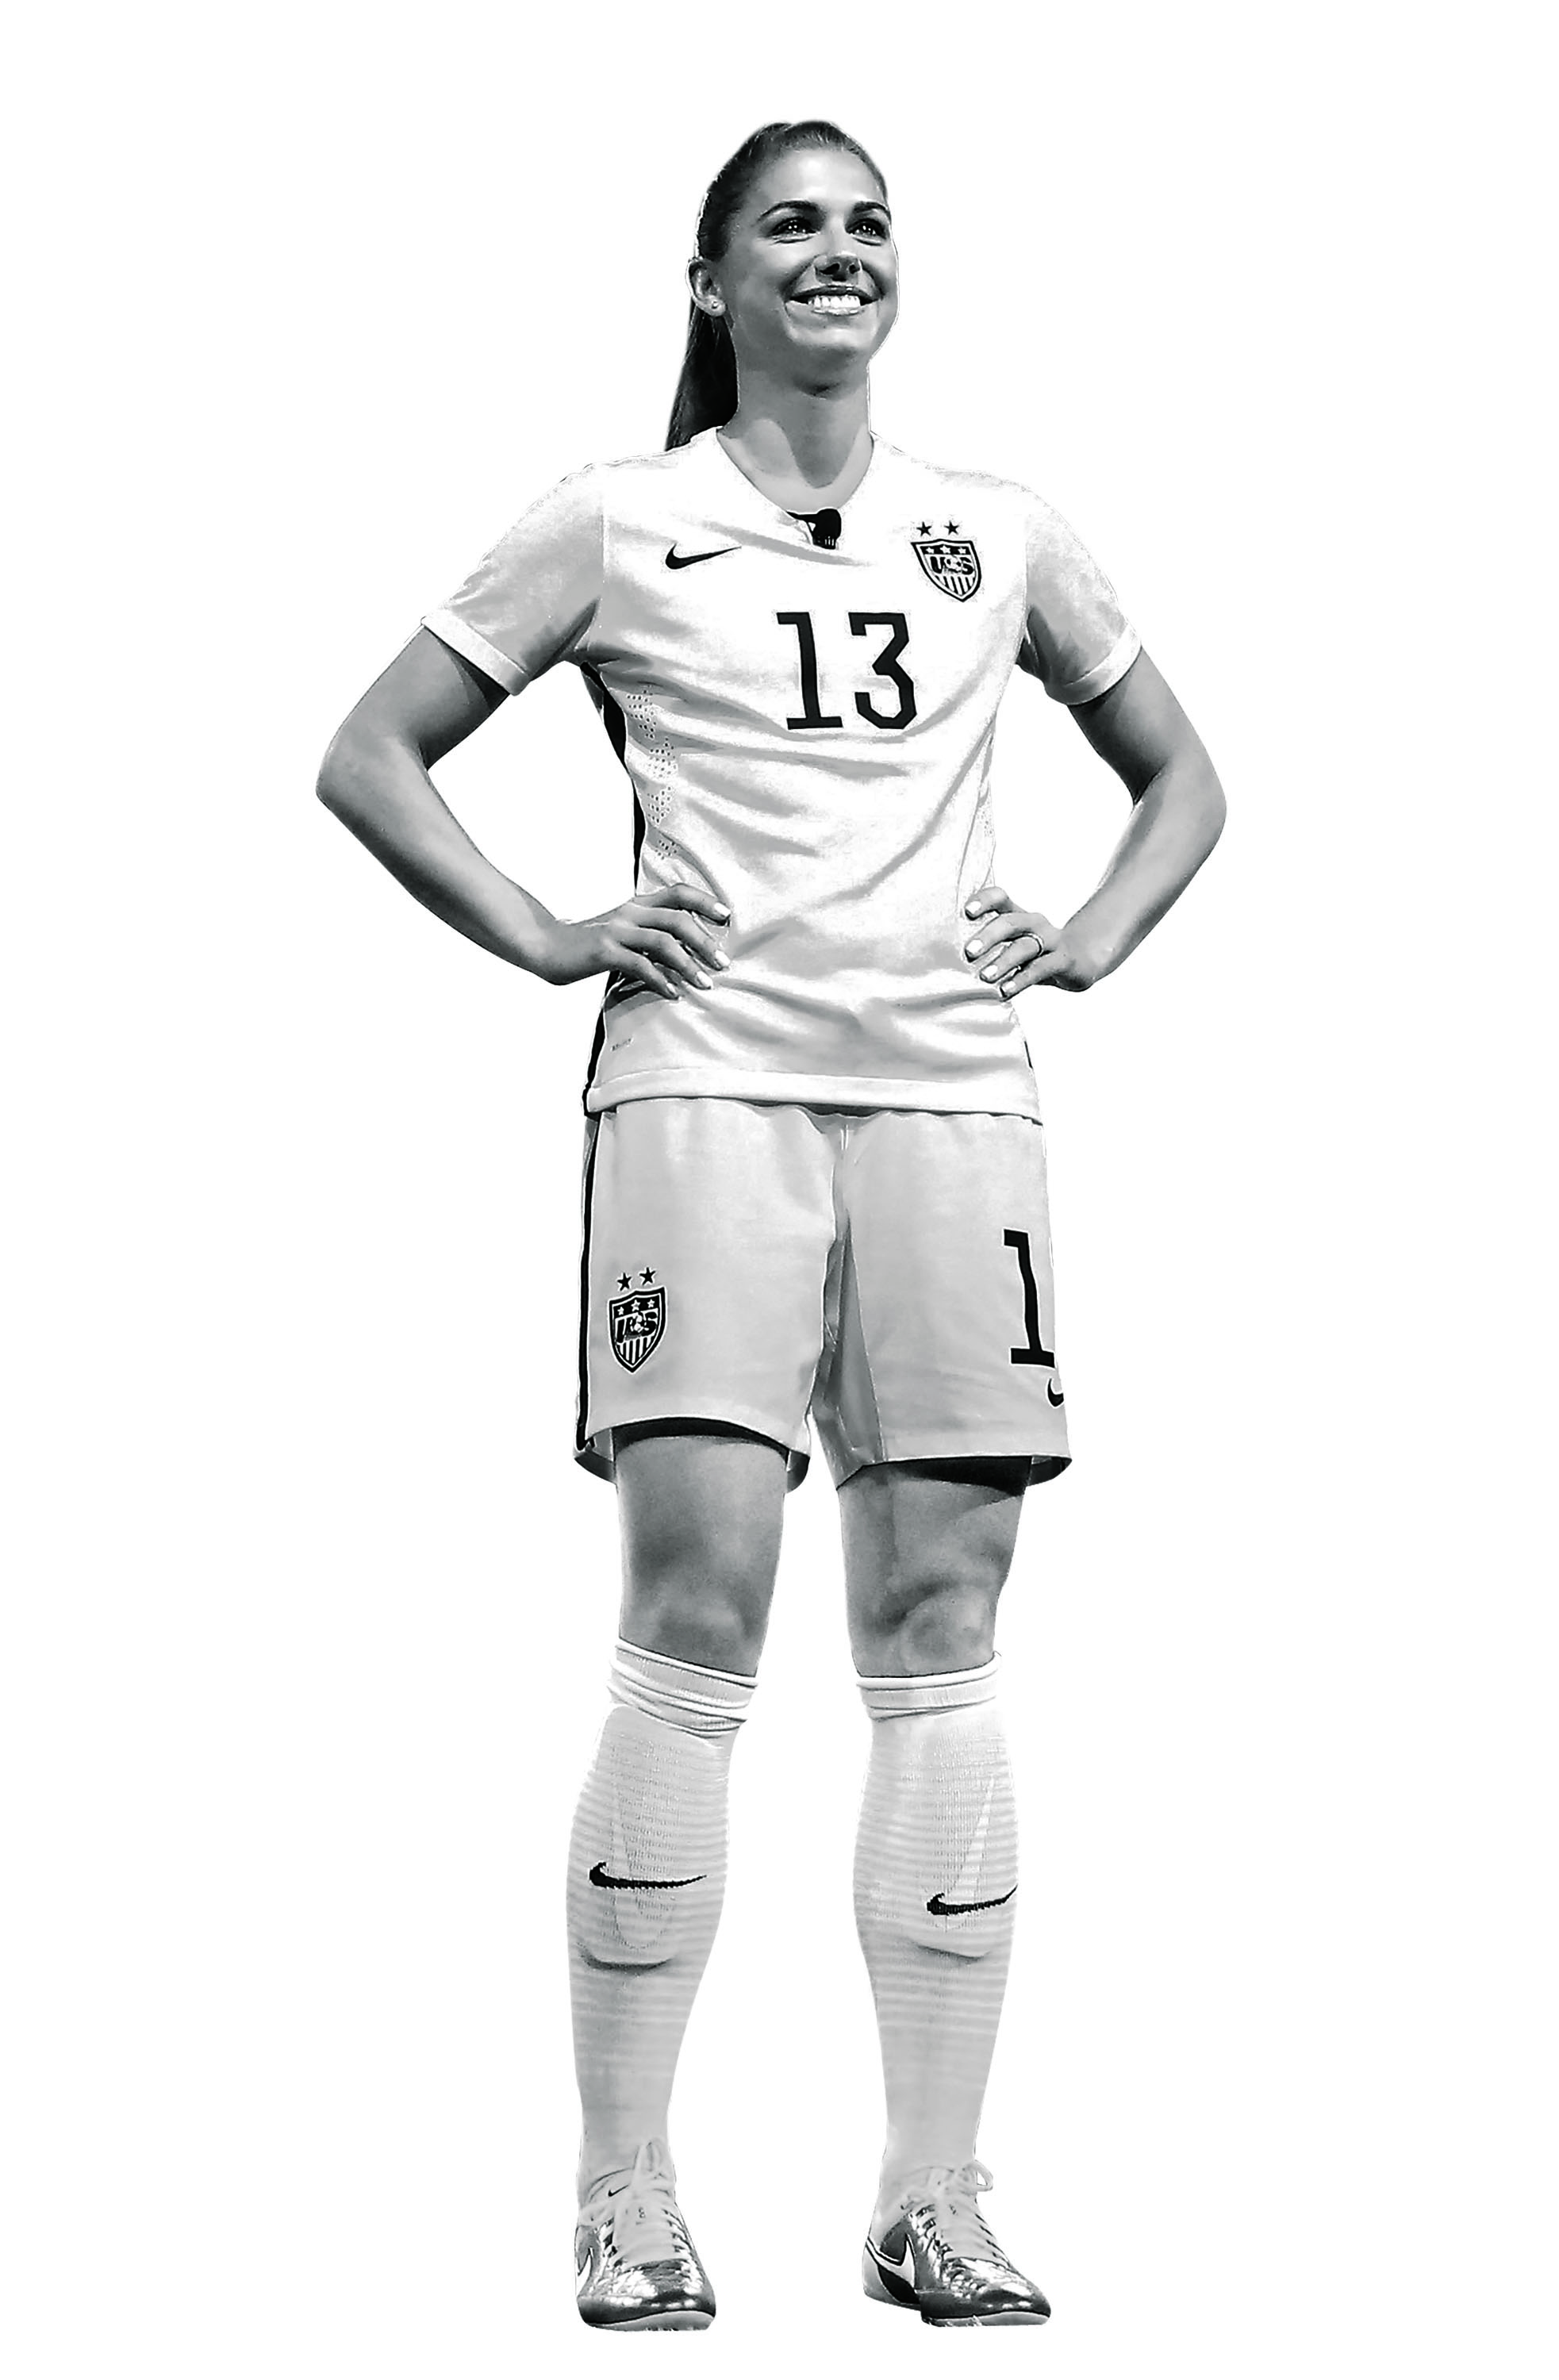 United States Women's Soccer Team member Alex Morgan. (Victor Decolongon—Getty Images)